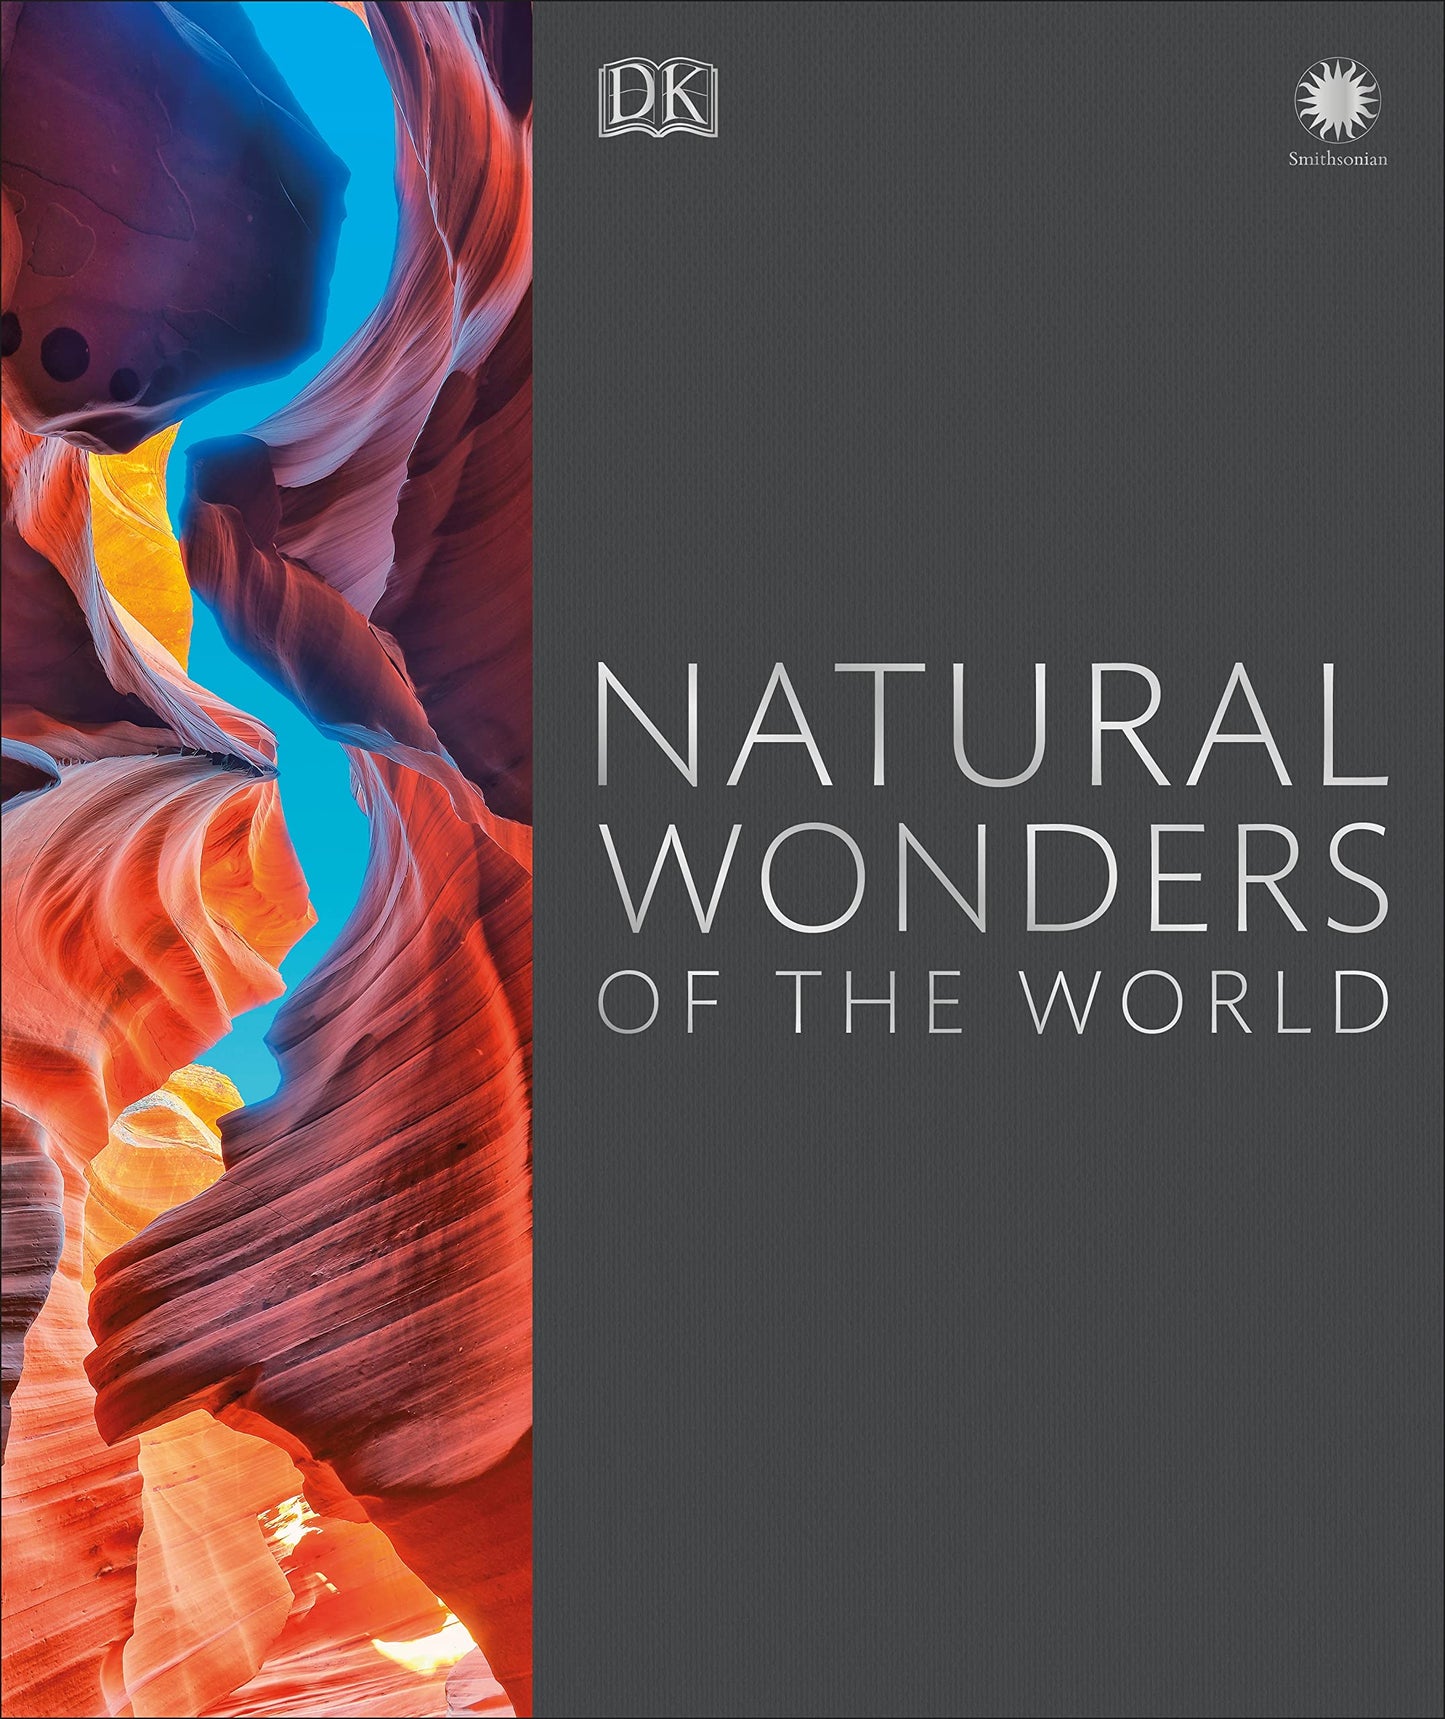 Natural Wonders of the World (DK Wonders of the World) [Hardcover] DK; Packham, Chris and Smithsonian Institution